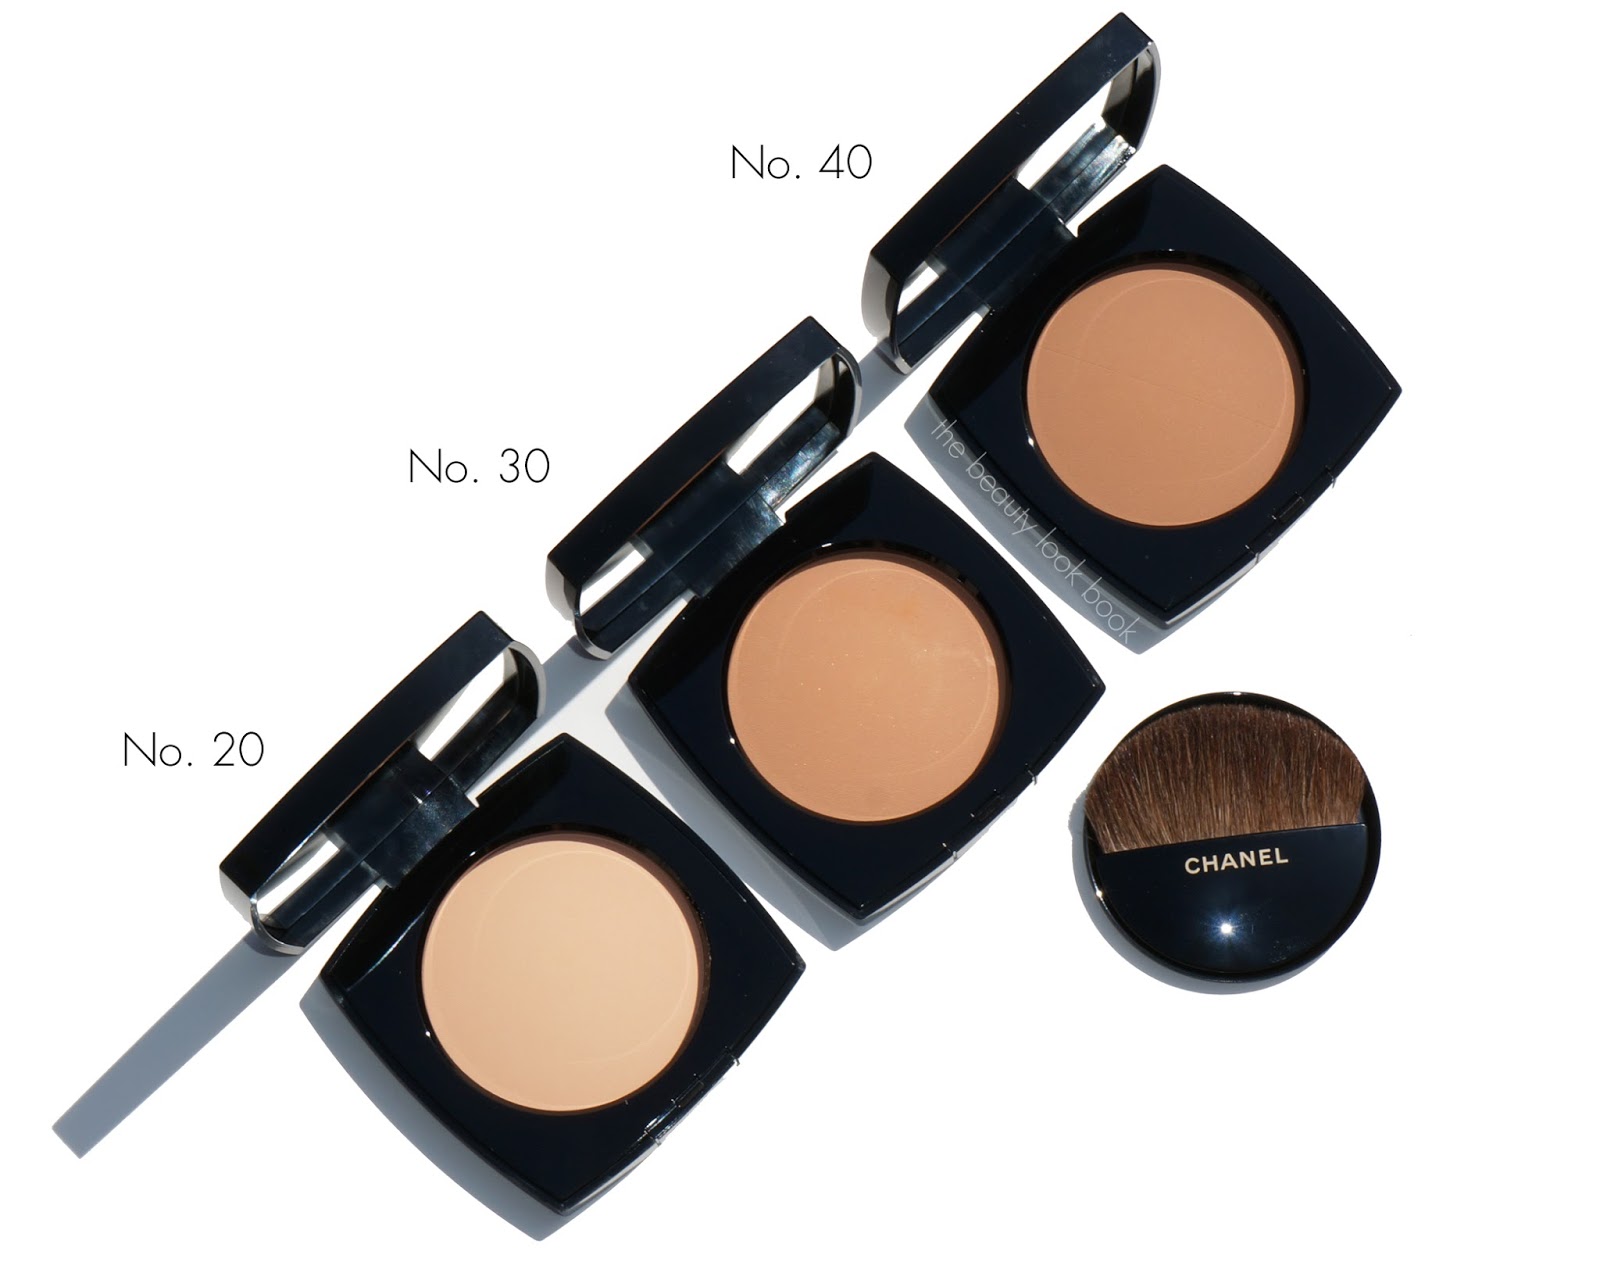 Chanel Les Beiges Healthy Glow Sheer Colour SPF Powders N° 20, 30 and 40 - Beauty Look Book